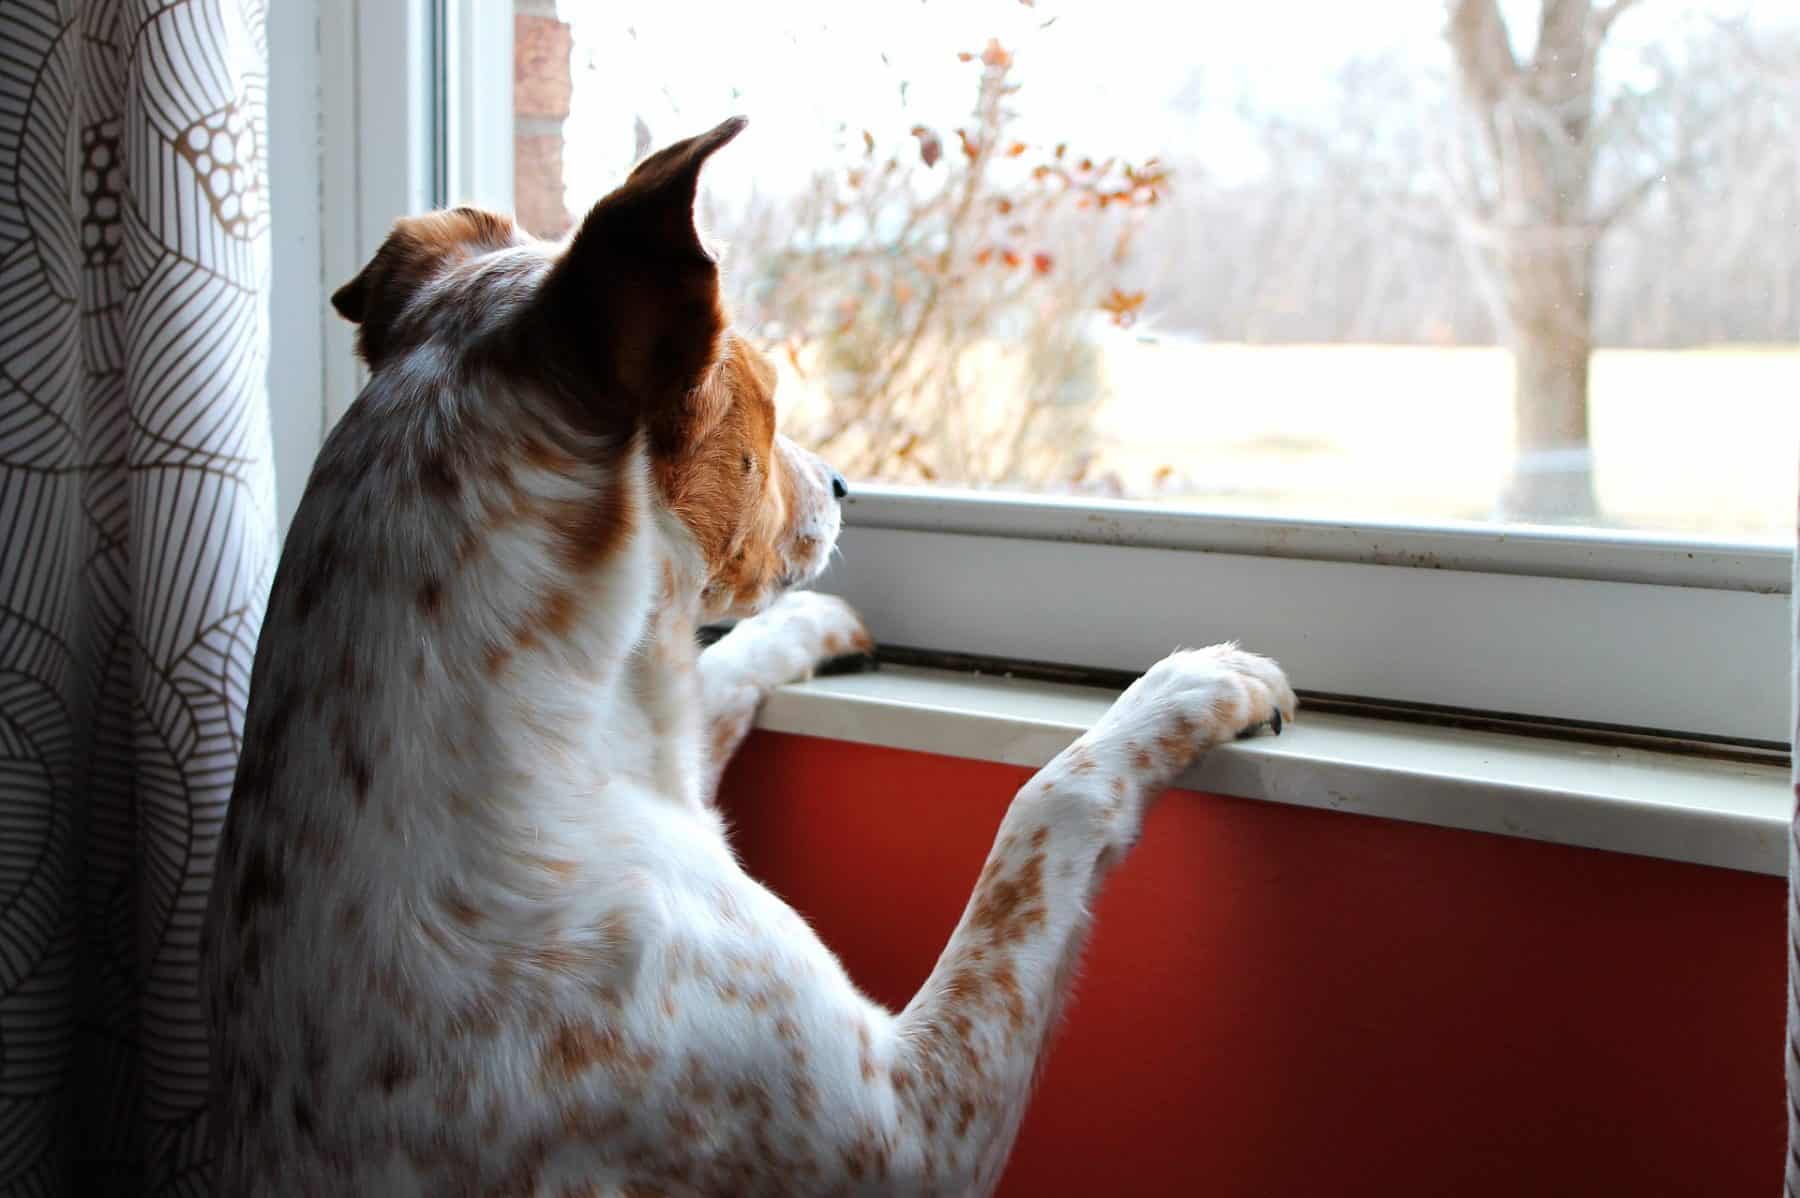 How Long Can You Leave a Dog Alone? | The Dog People by Rover.com